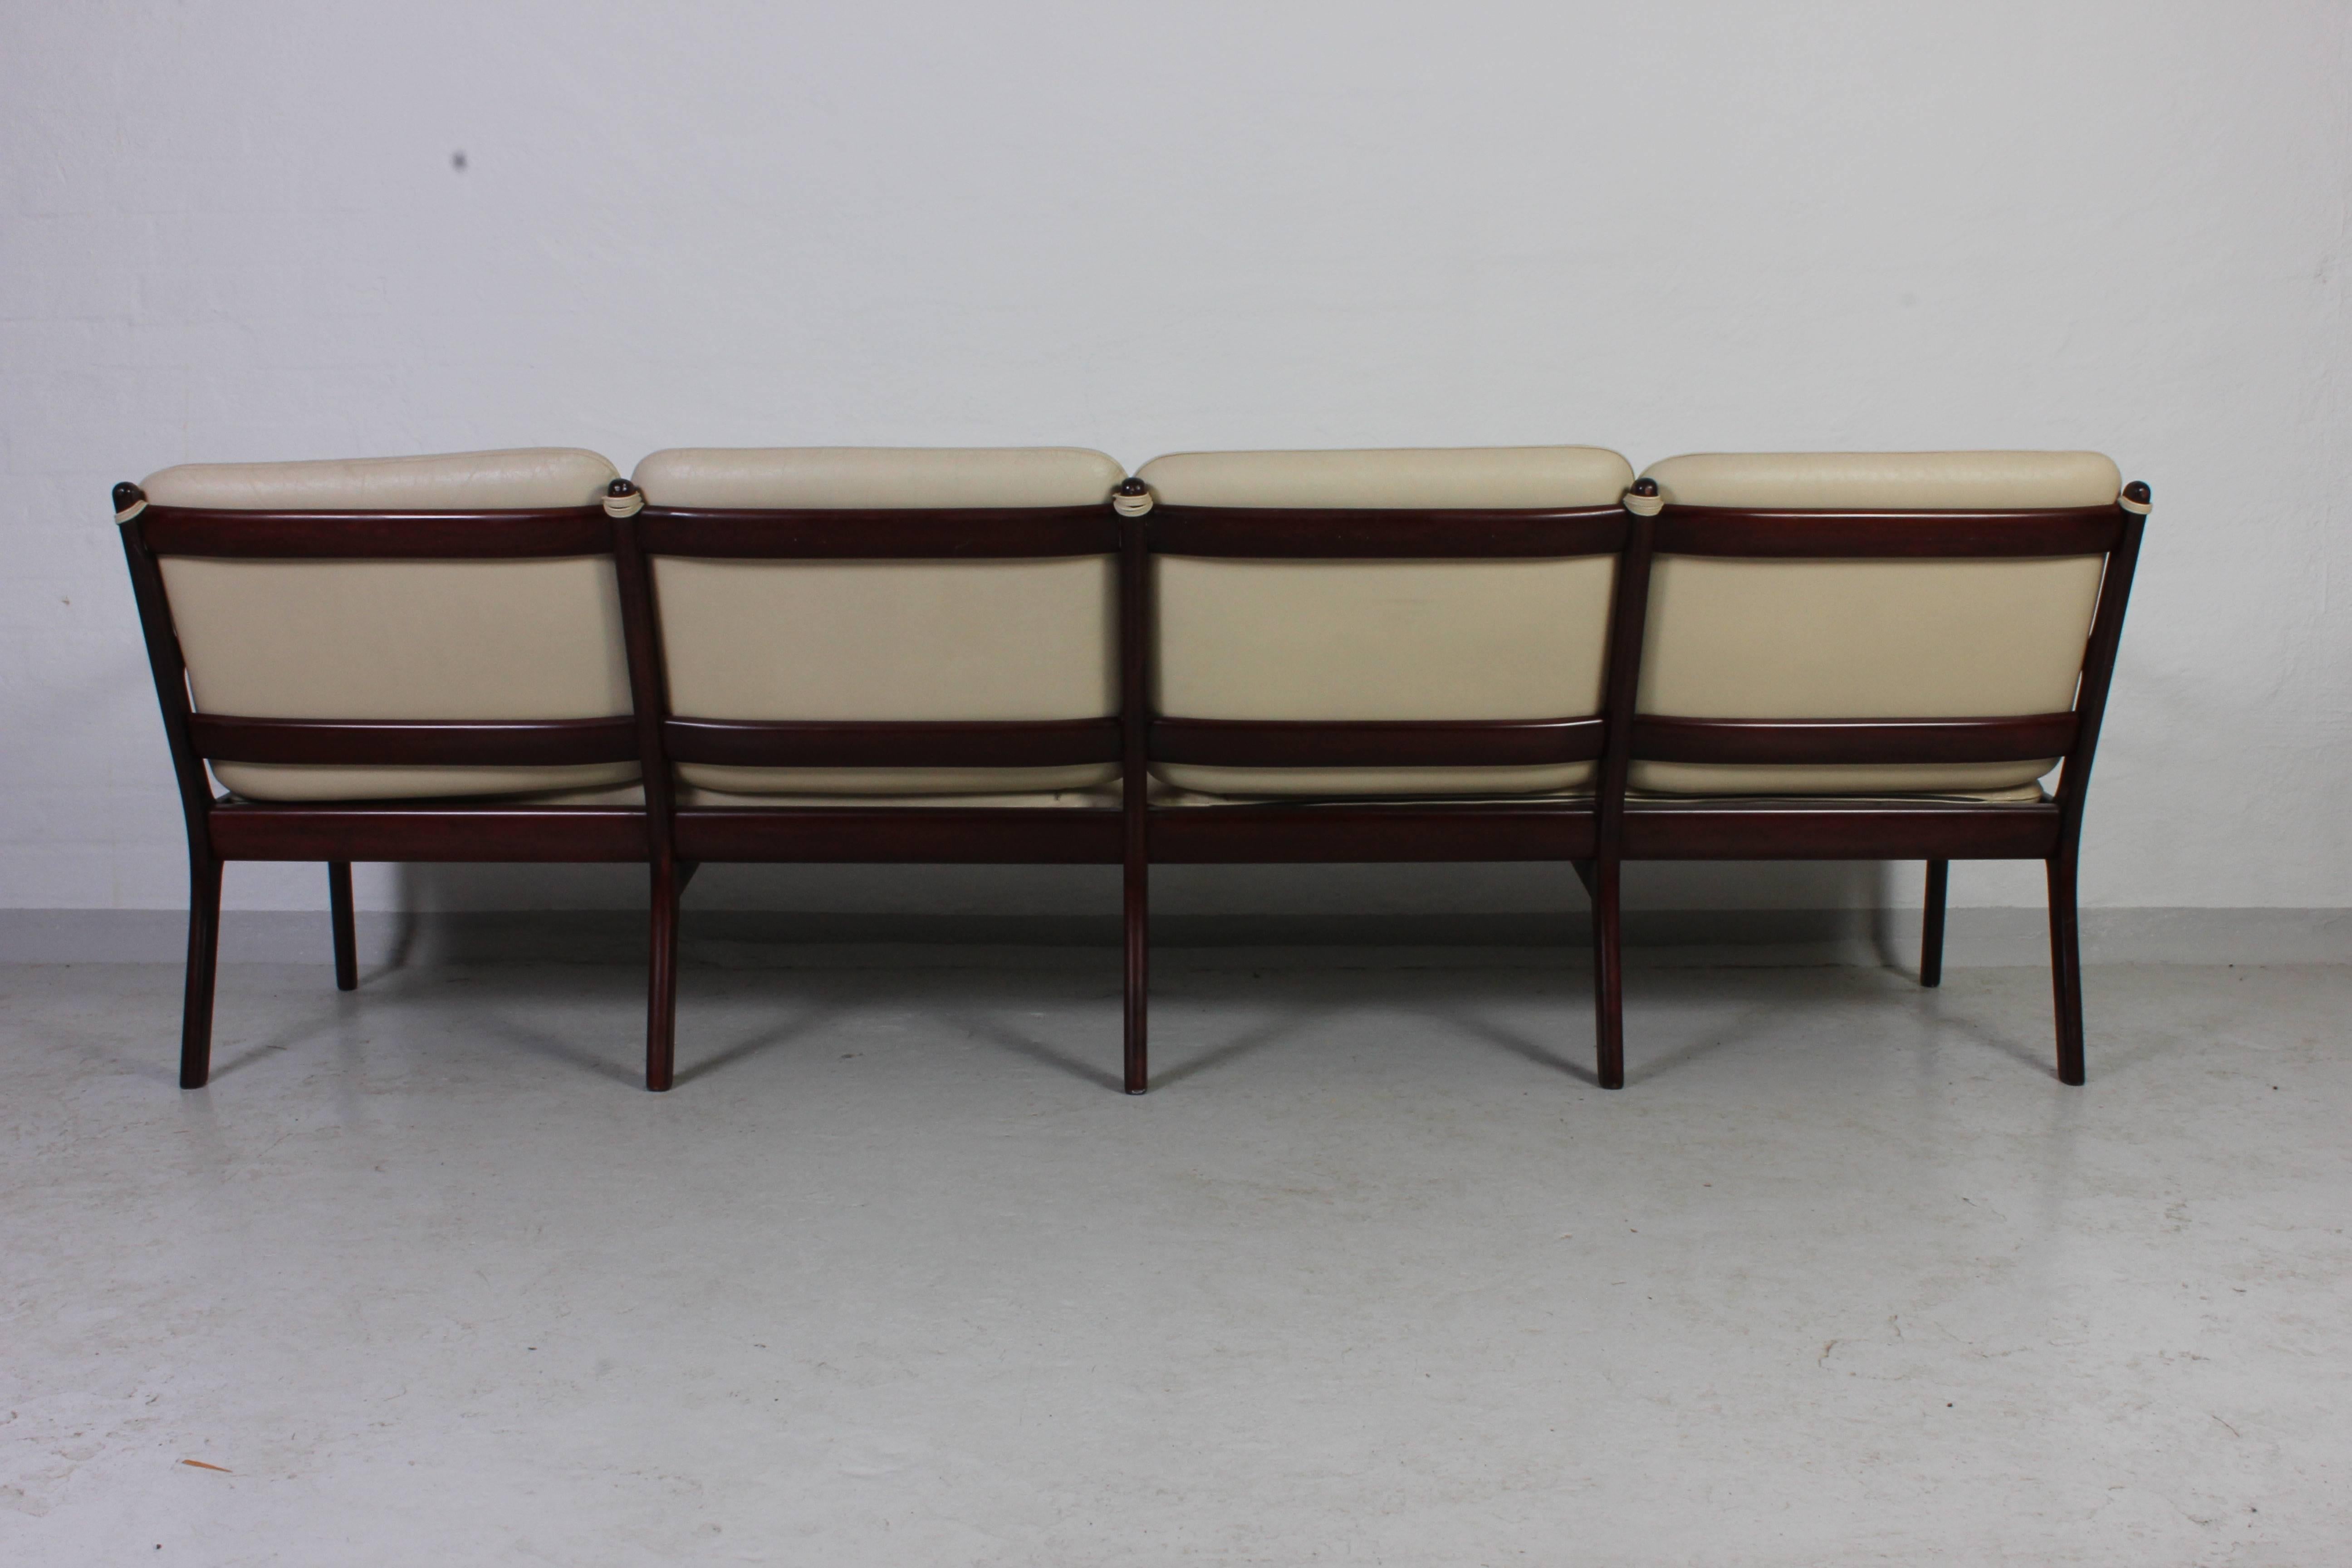 Mid-Century Modern Ole Wanscher Mahogany PJ112 Four-Seat Sofa and Lounge Chair for Poul Jeppesen